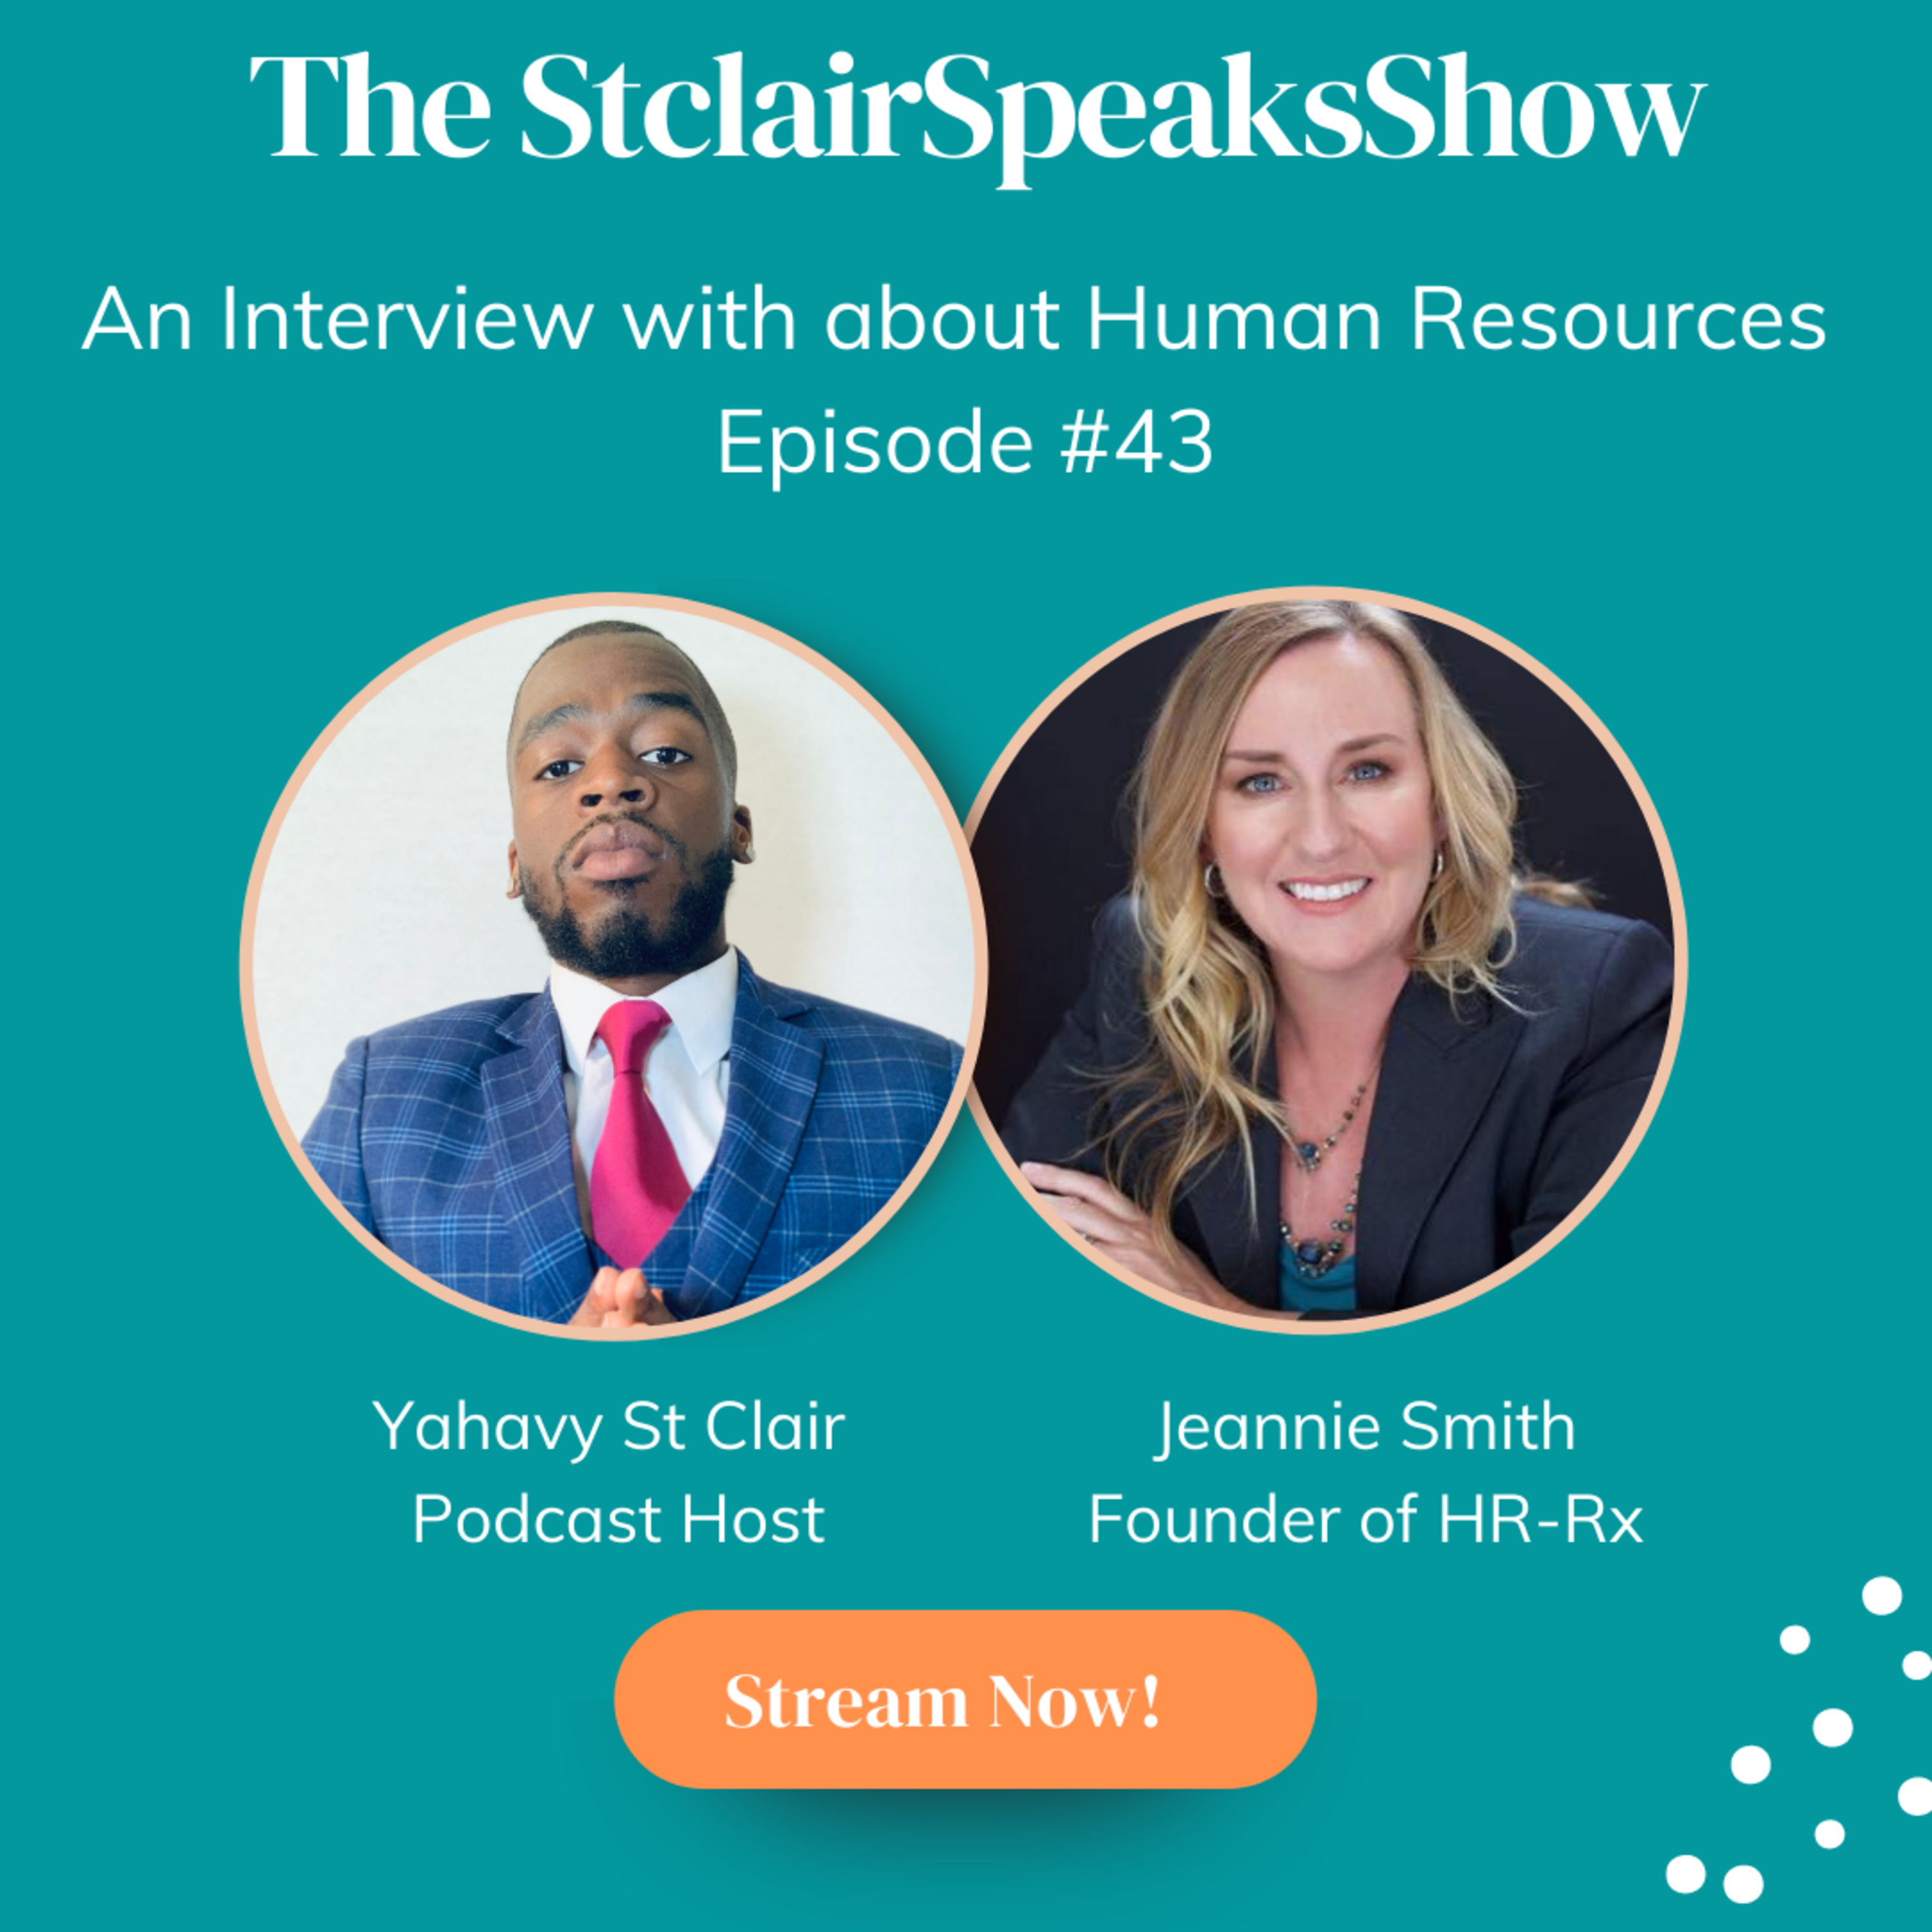 The StclairSpeaksShow Podcast Featuring Jeannie Smith founder of HR-Rx Episode #43